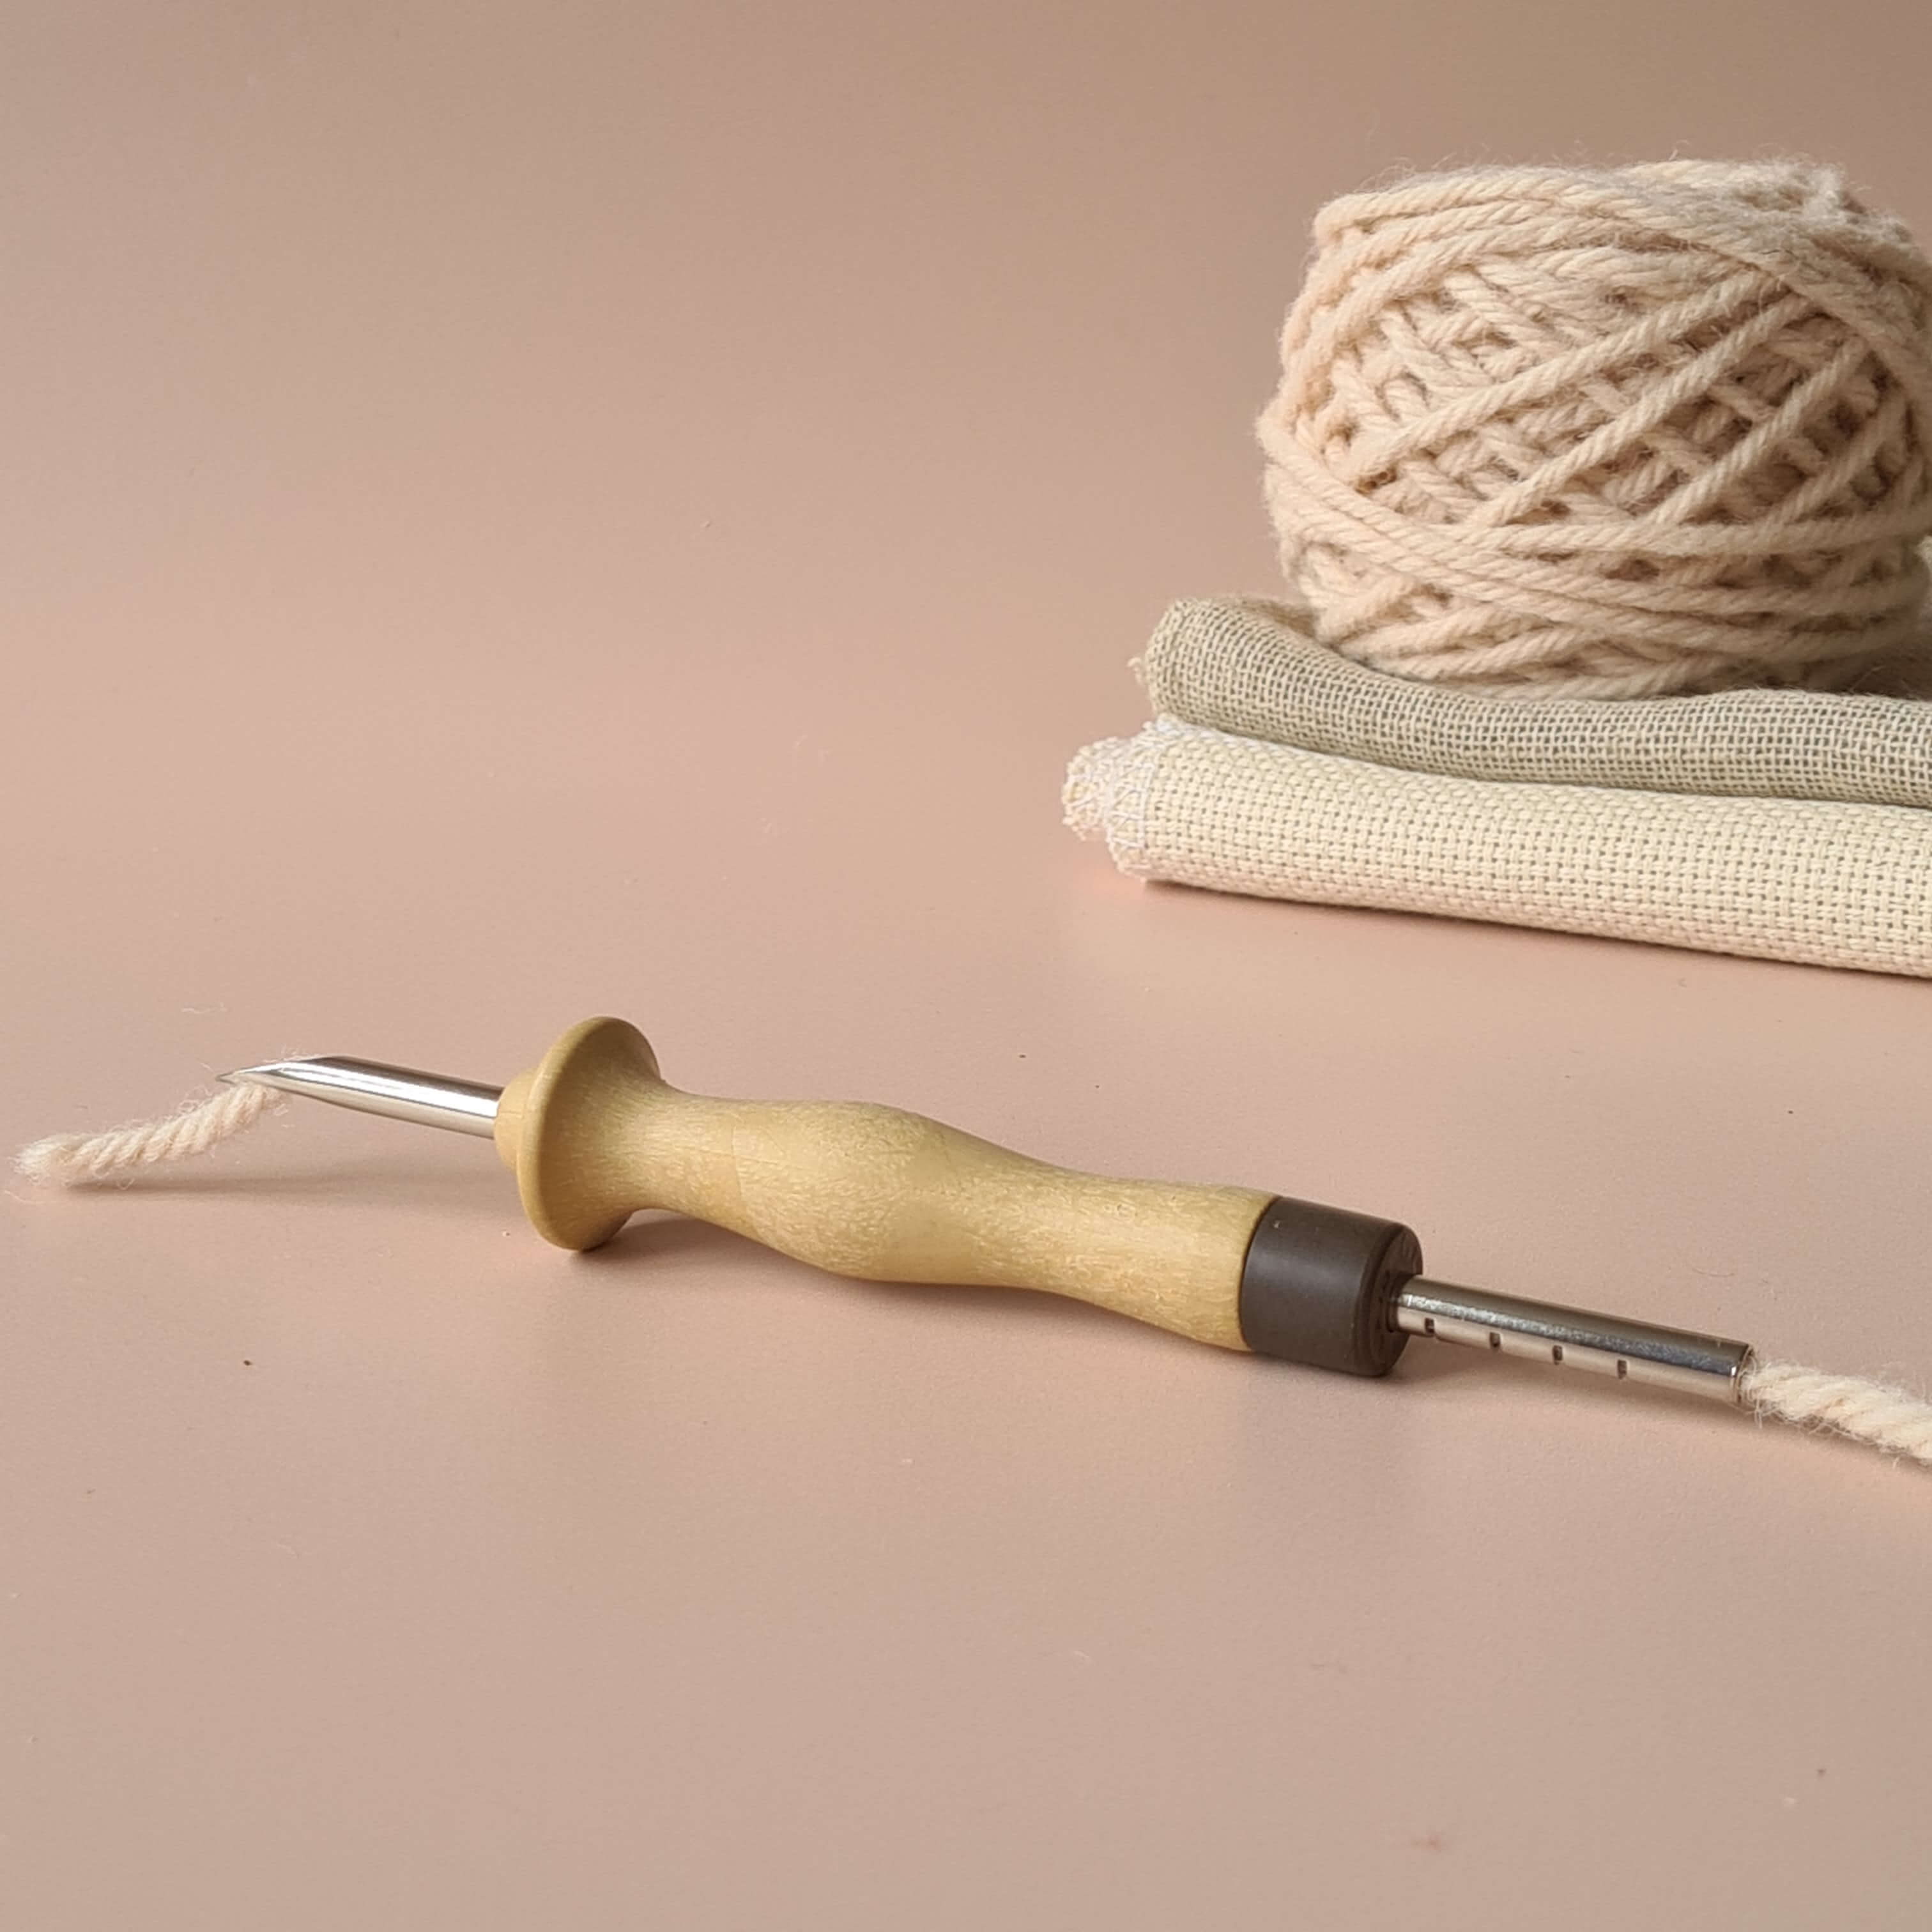 How To Use Lavor Adjustable Punch Needle – With Autumn